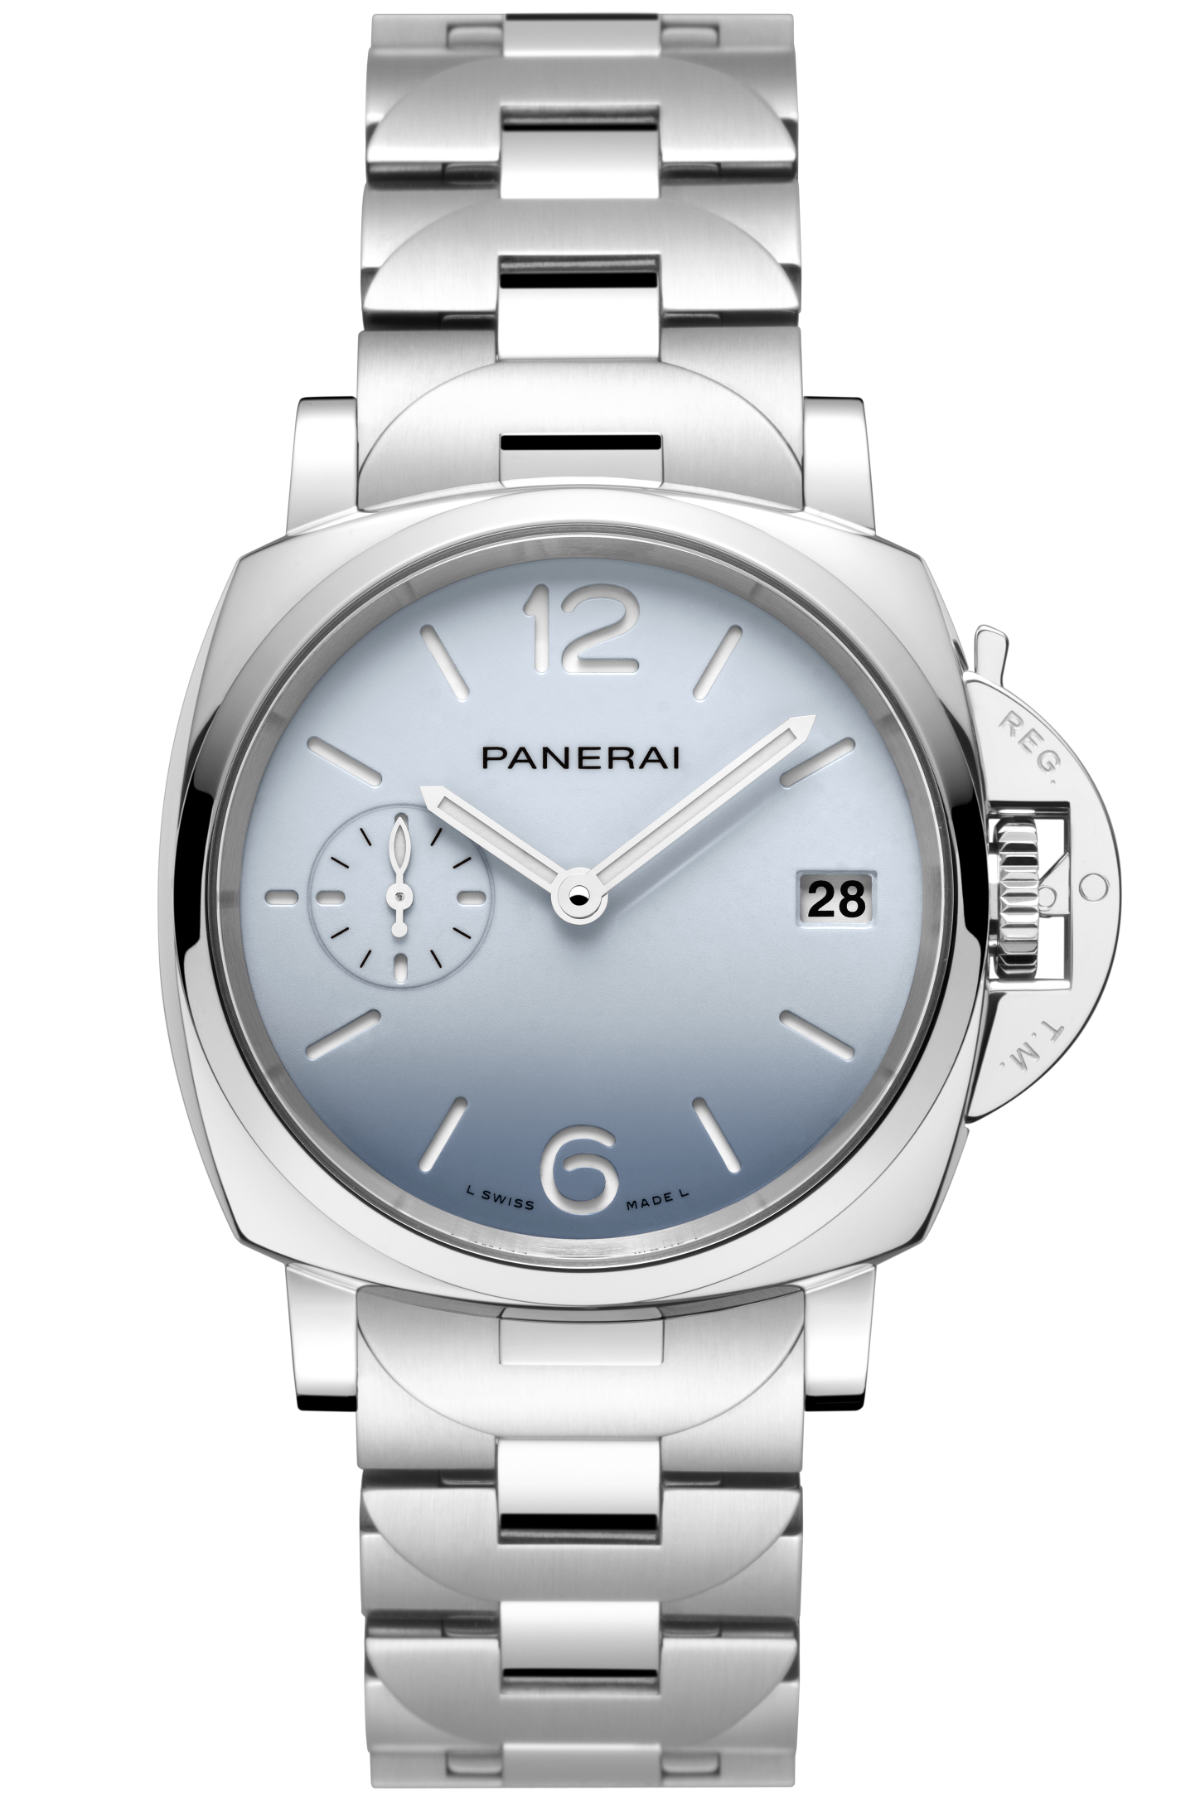 Panerai Presents Its New Luminor Due 38mm Watch Collection